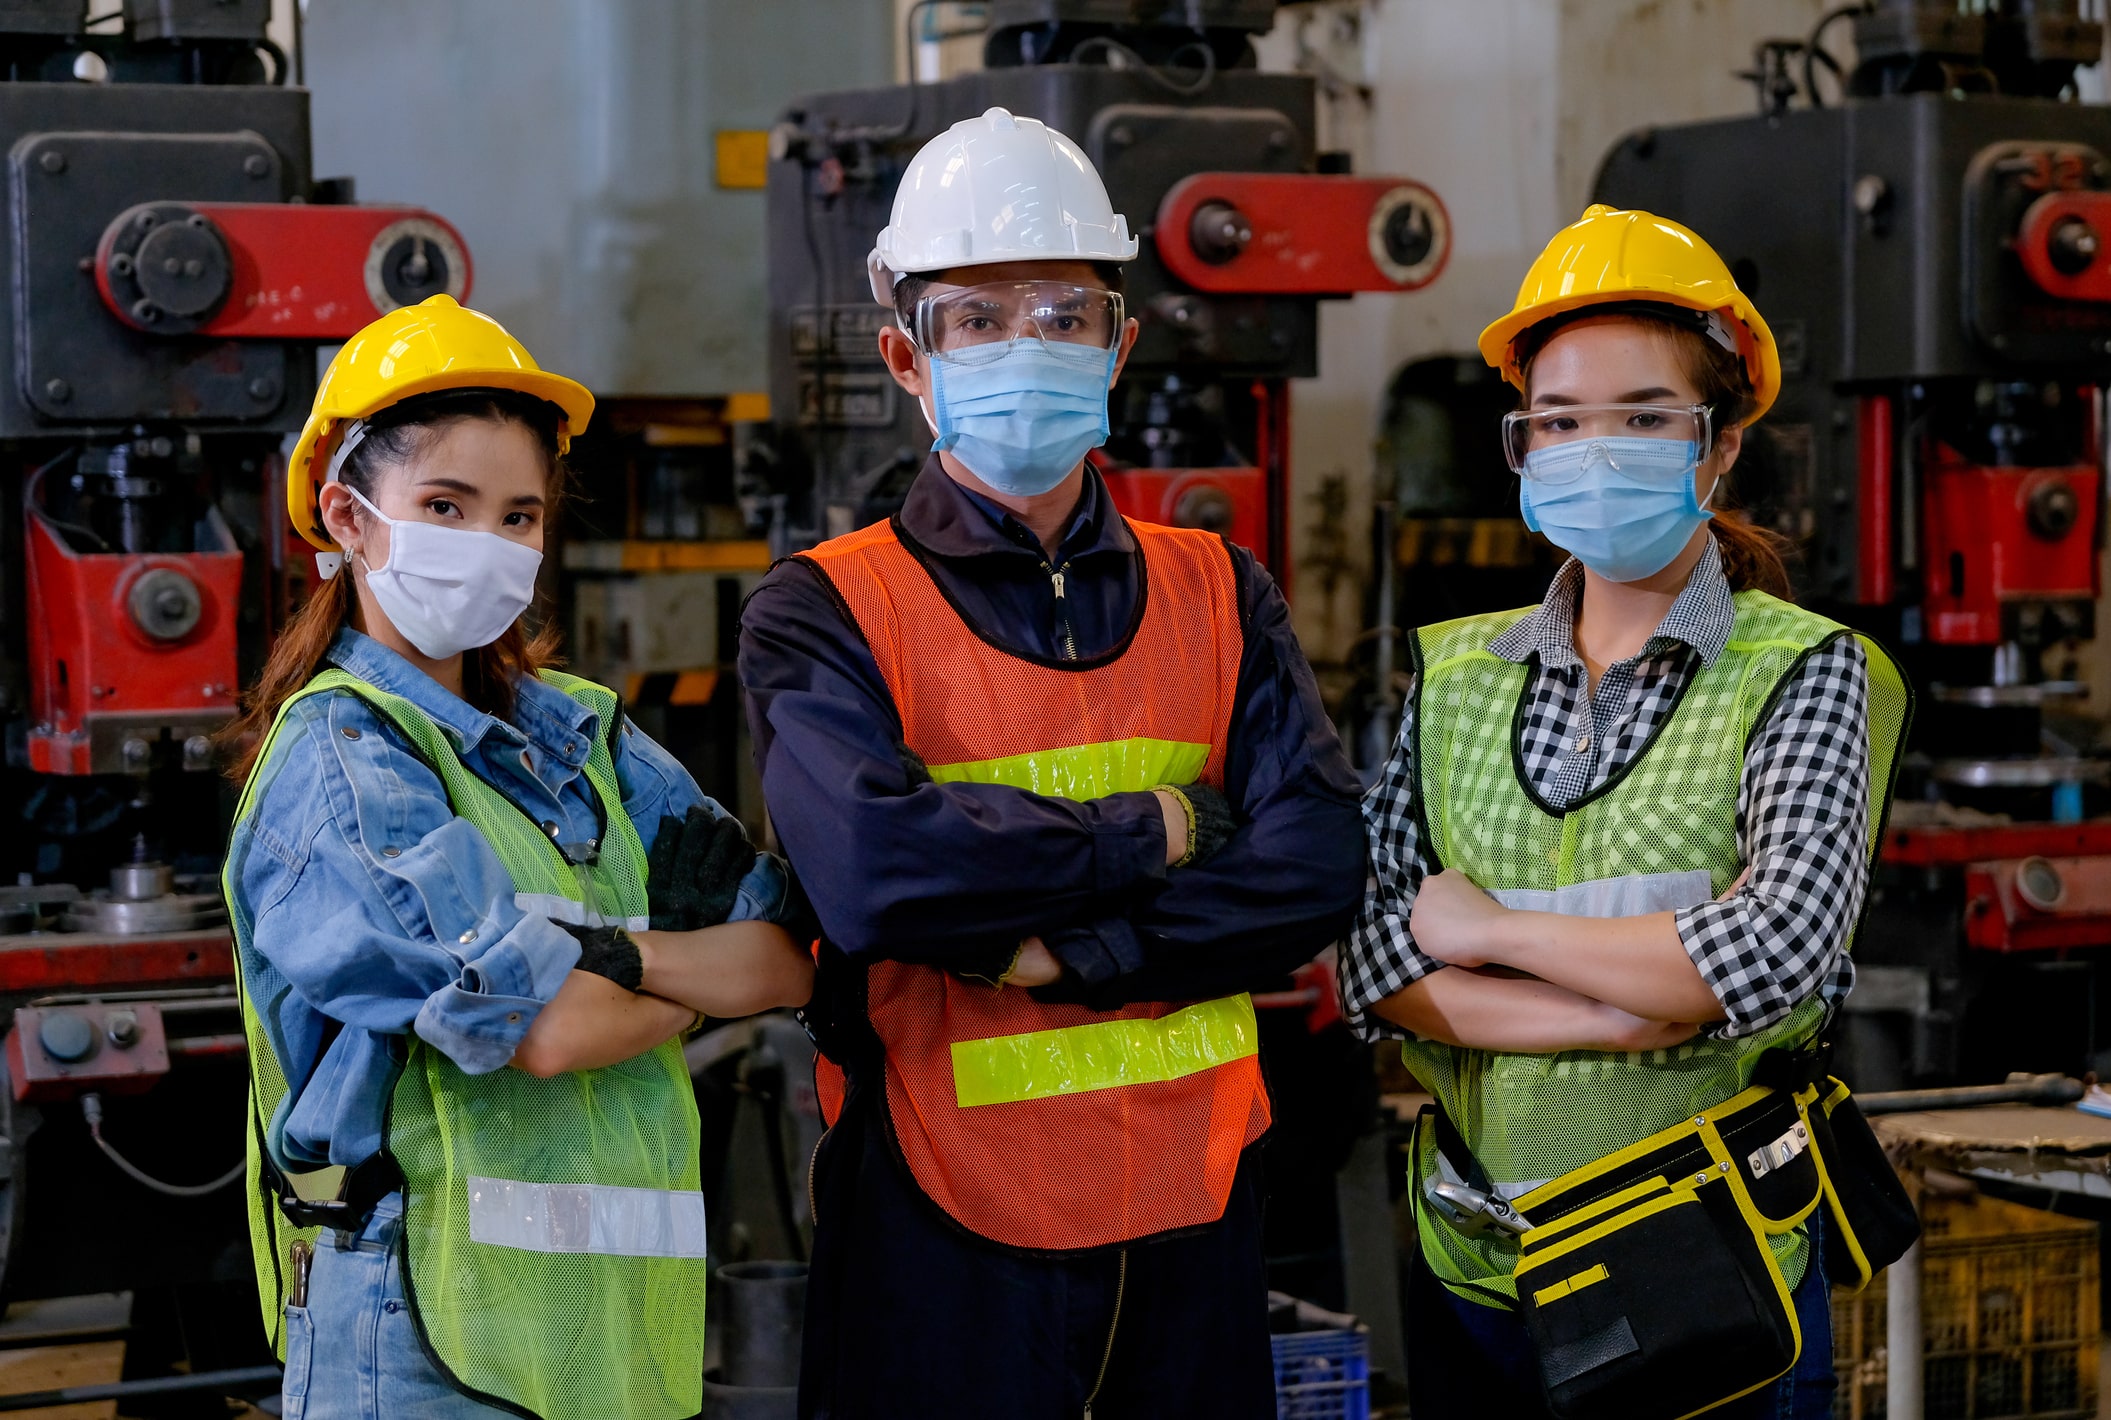 Are employers required to provide PPE